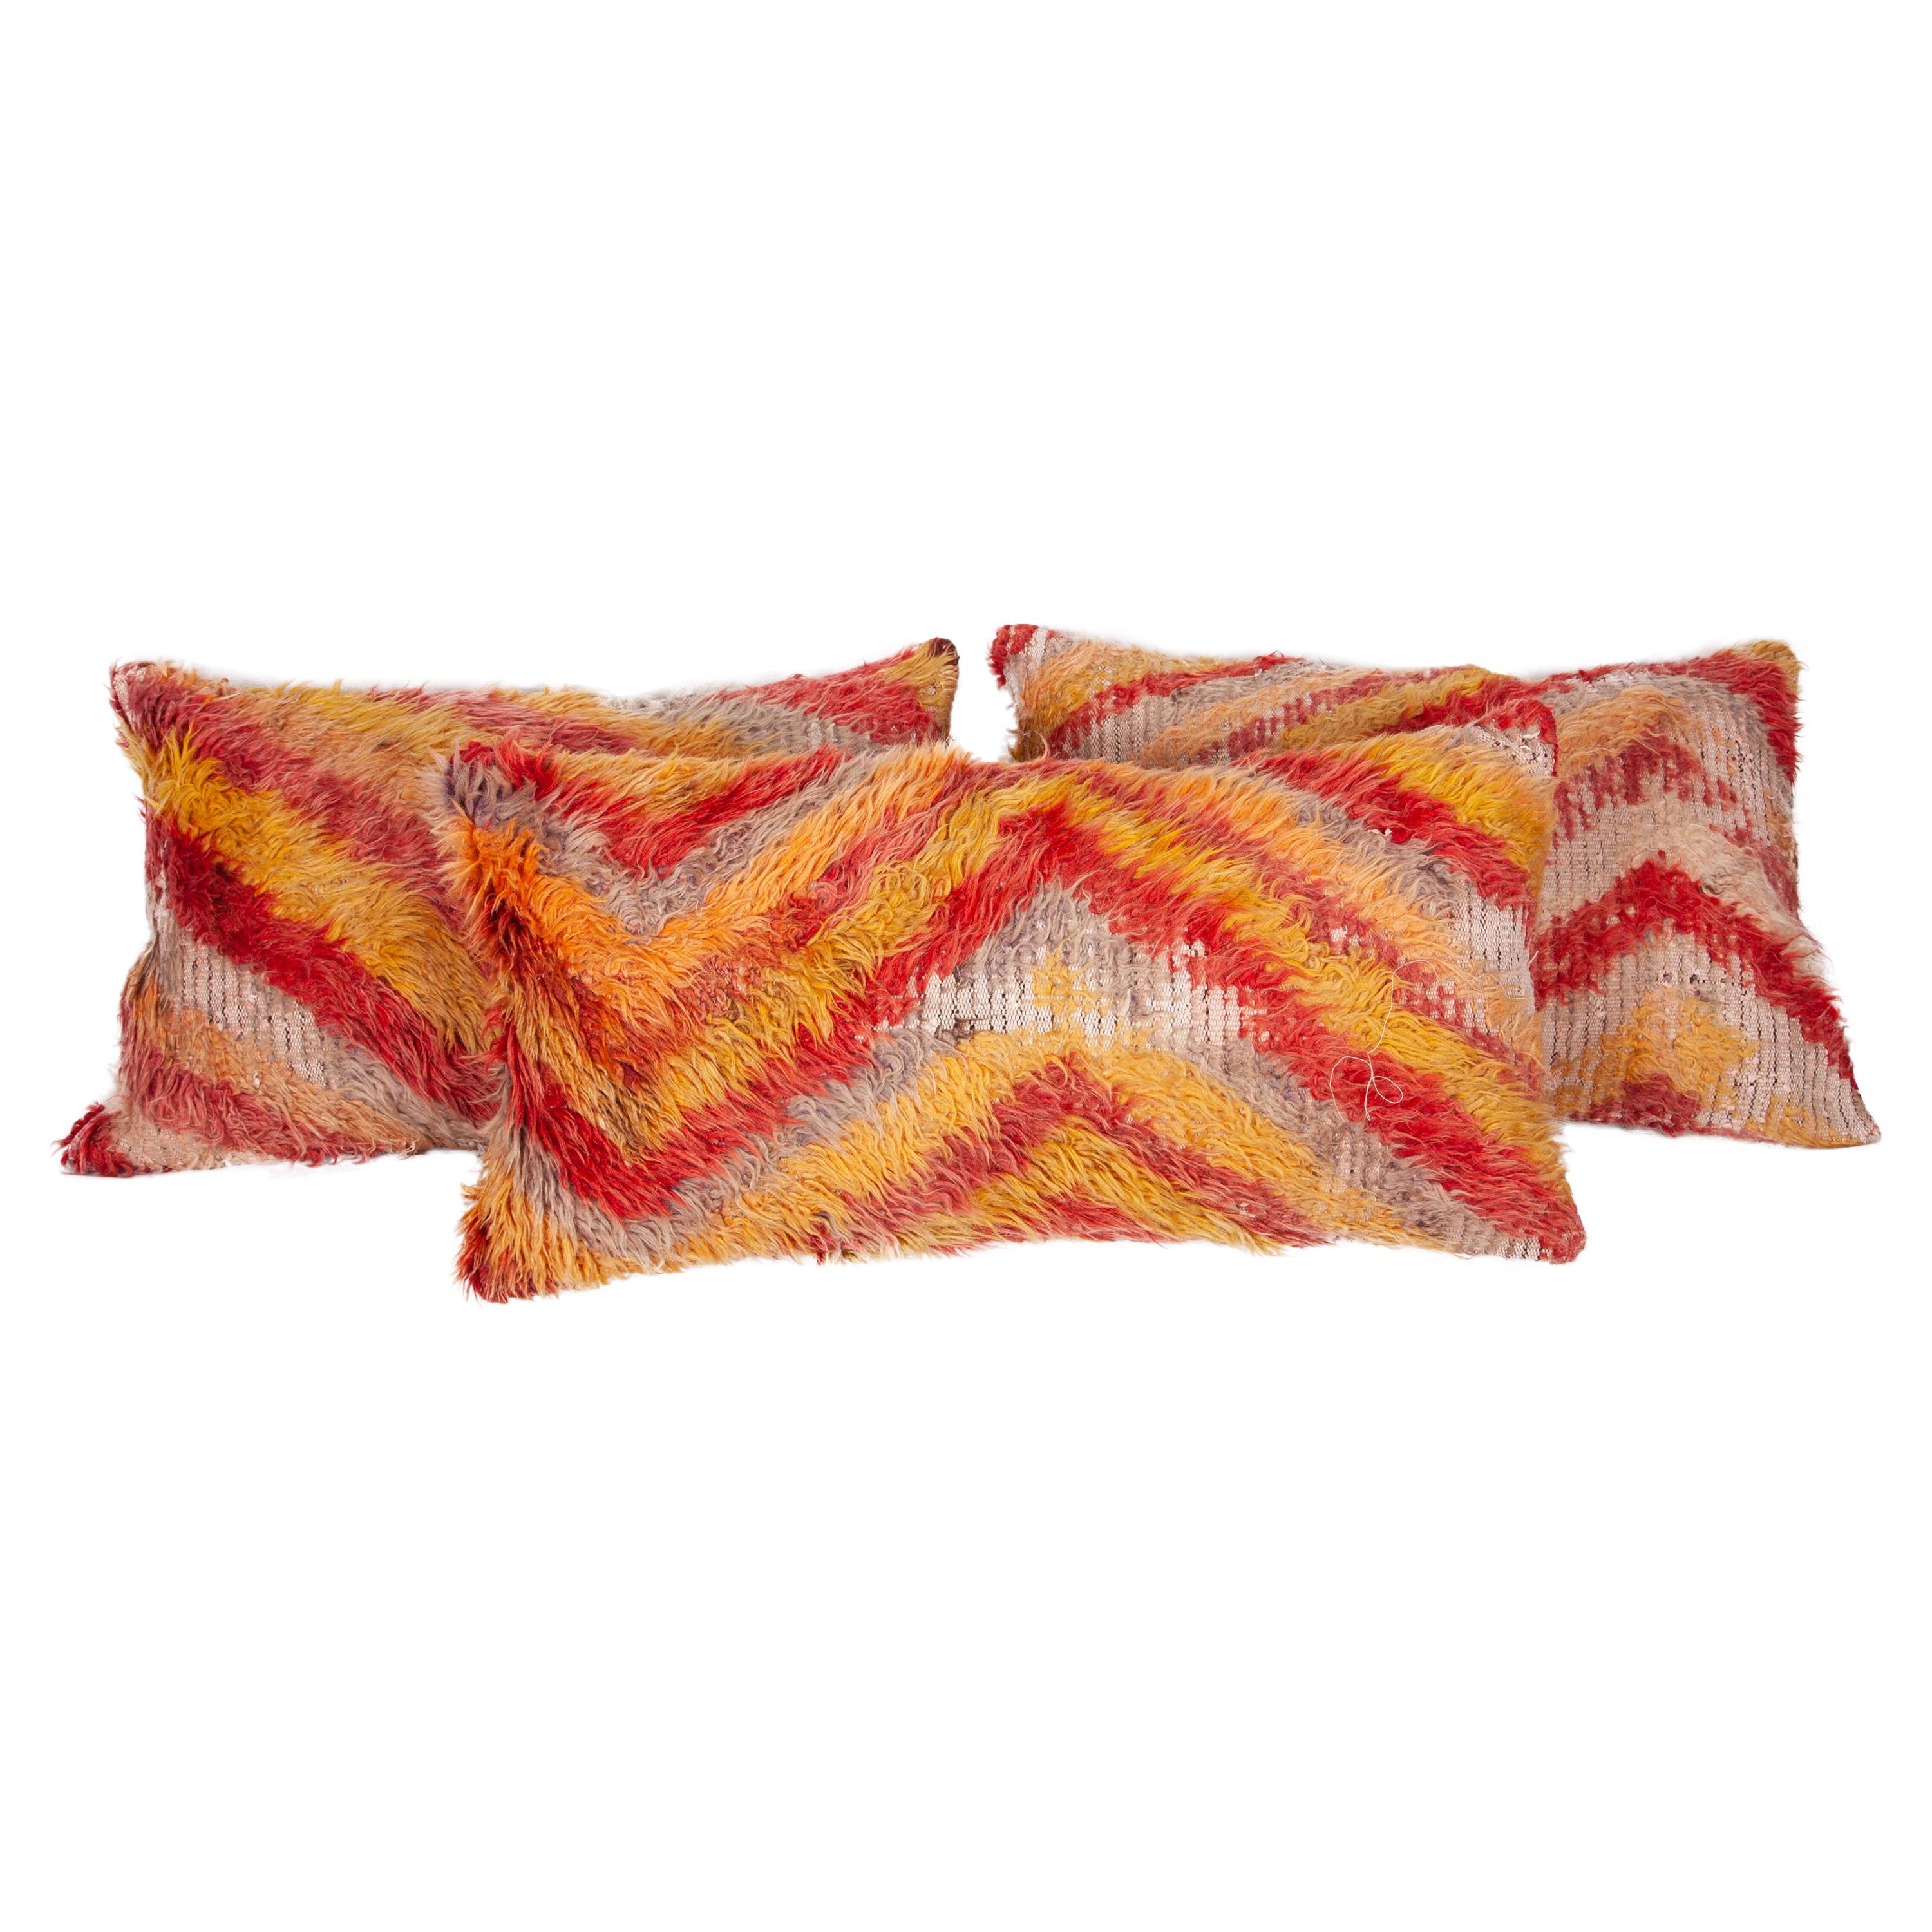 Tulu Pillow Cases Fashioned from a Mid-20th Century Tulu Rug